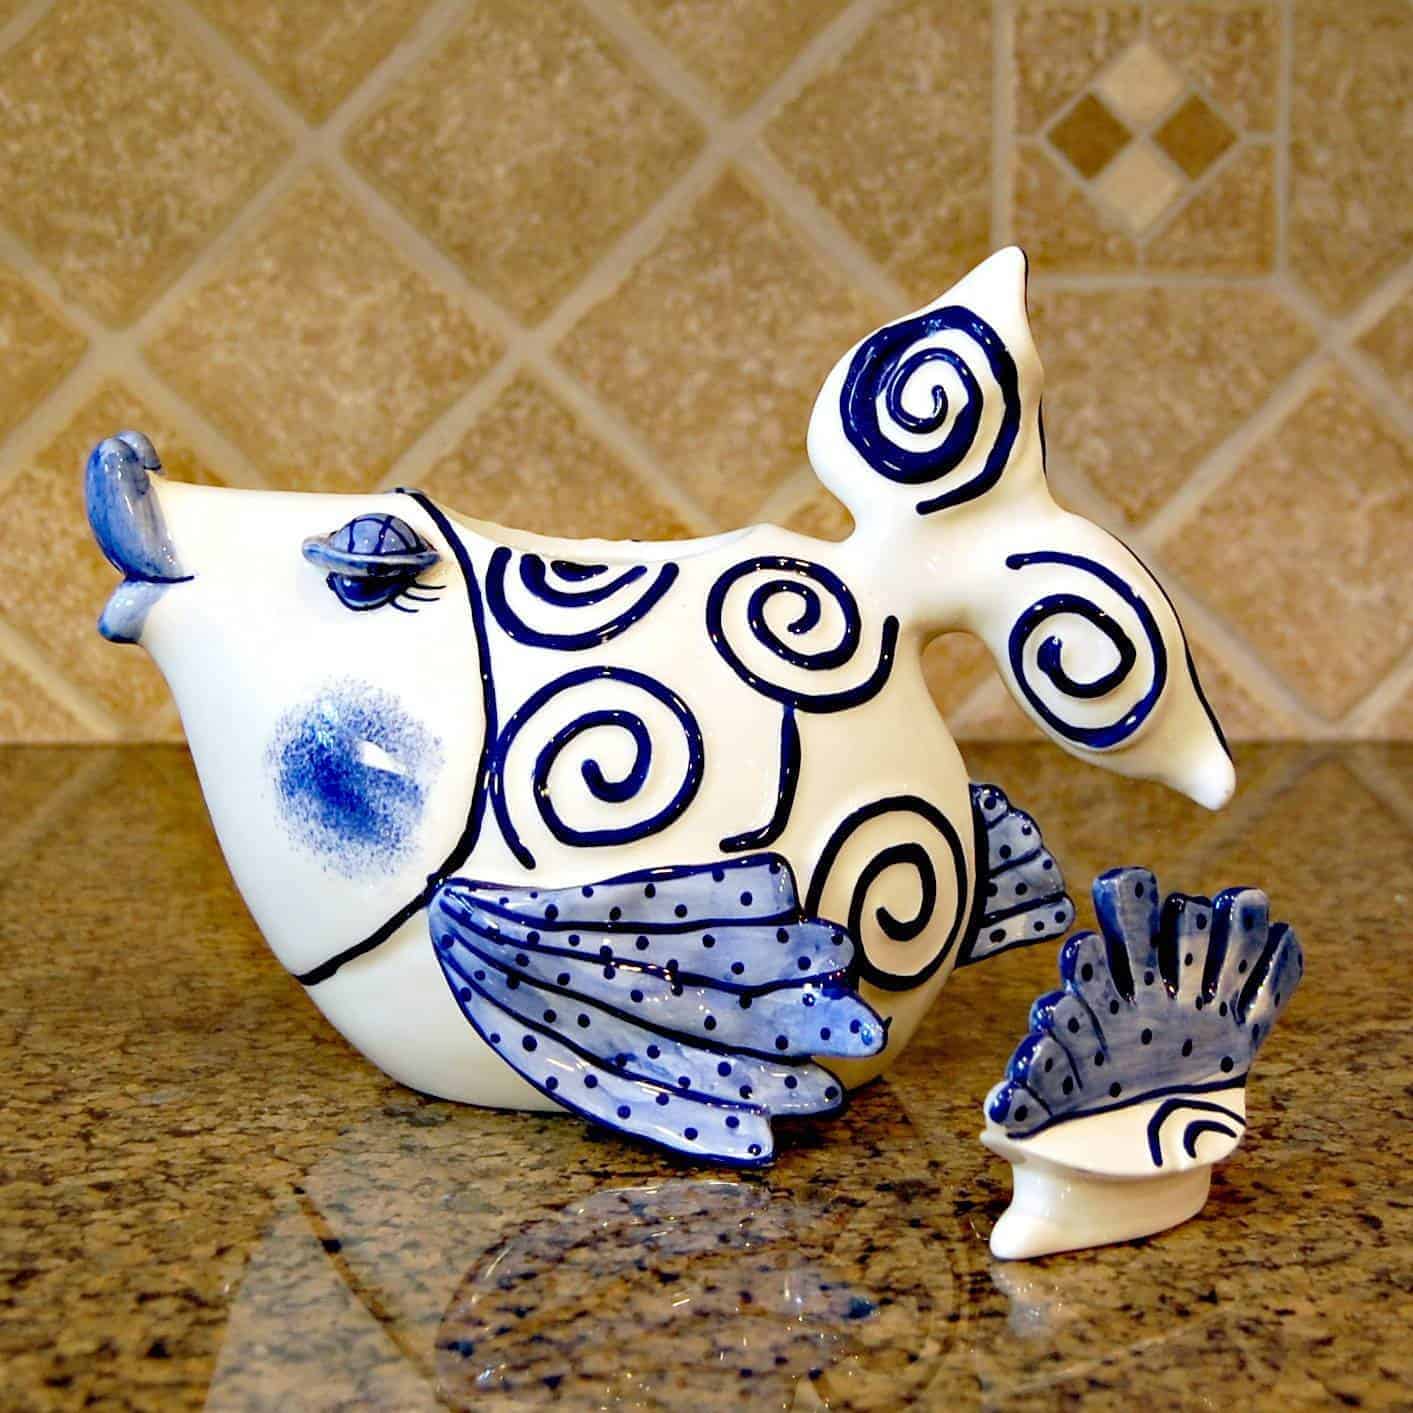 This Blue Ocean Fish Teapot is made with love by Premier Homegoods! Shop more unique gift ideas today with Spots Initiatives, the best way to support creators.